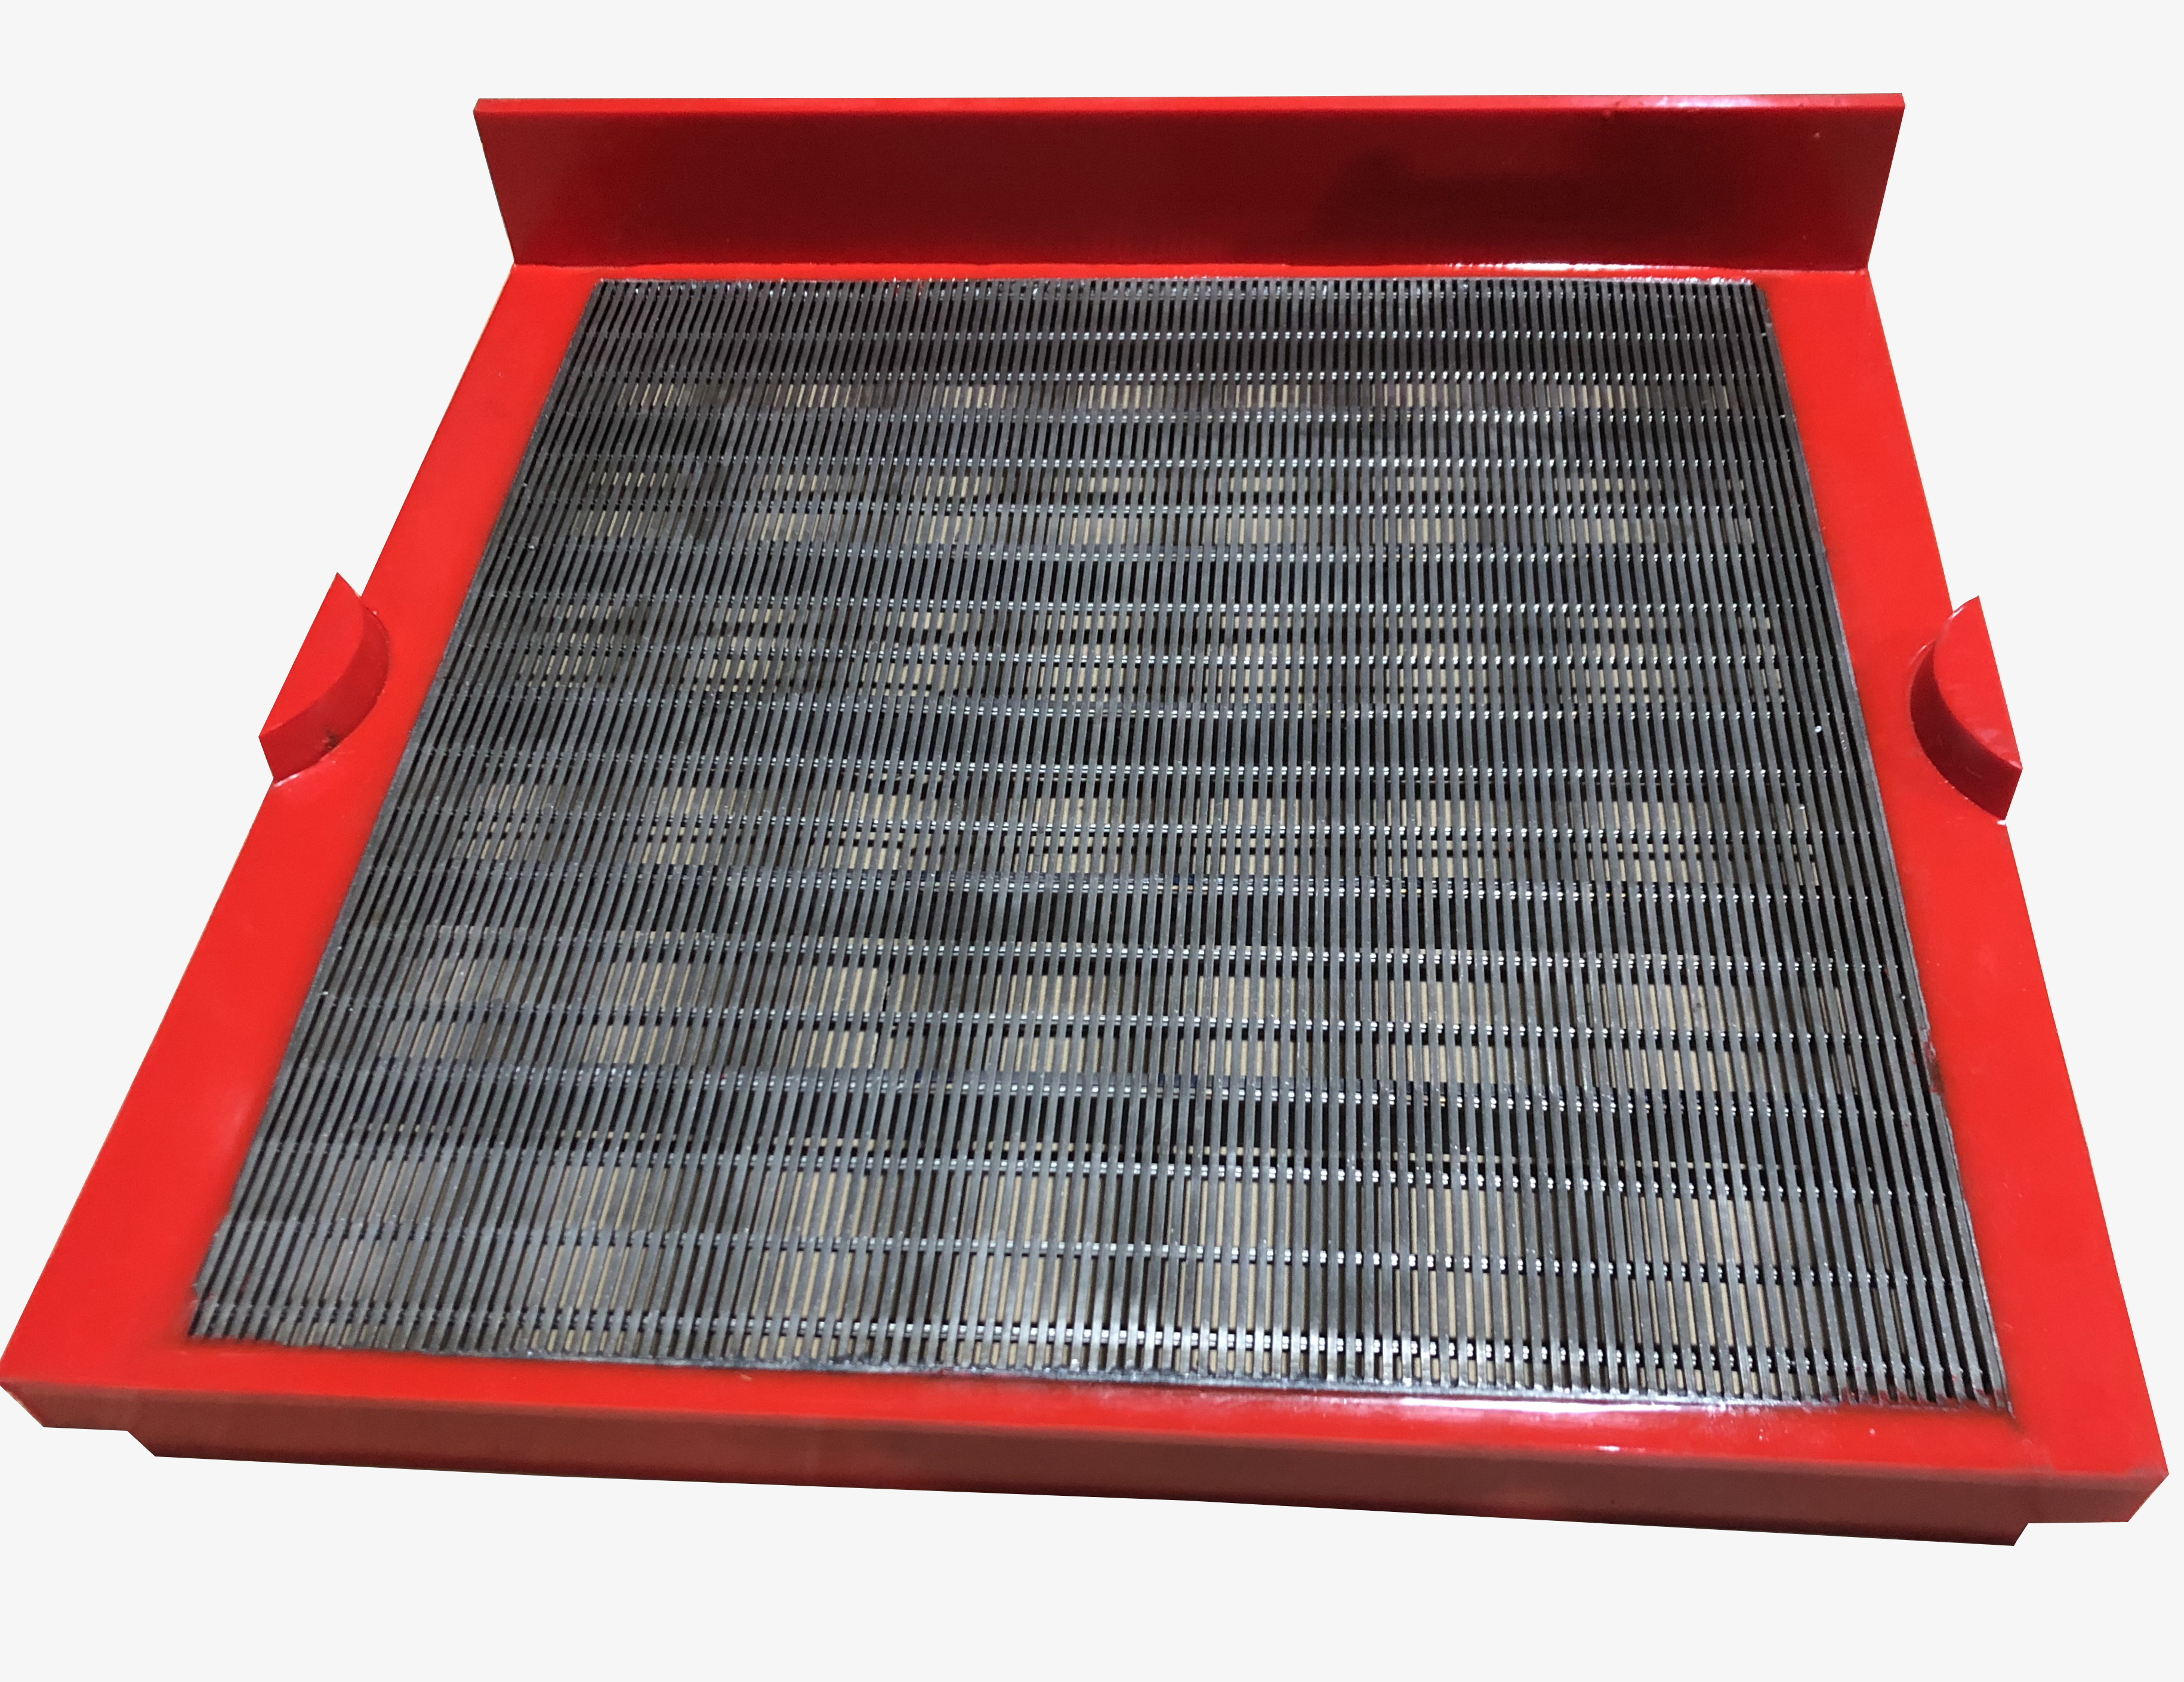 610mm*610mm*47mm Polyurethane and stainless steel vibrating screen mesh sieve plates 